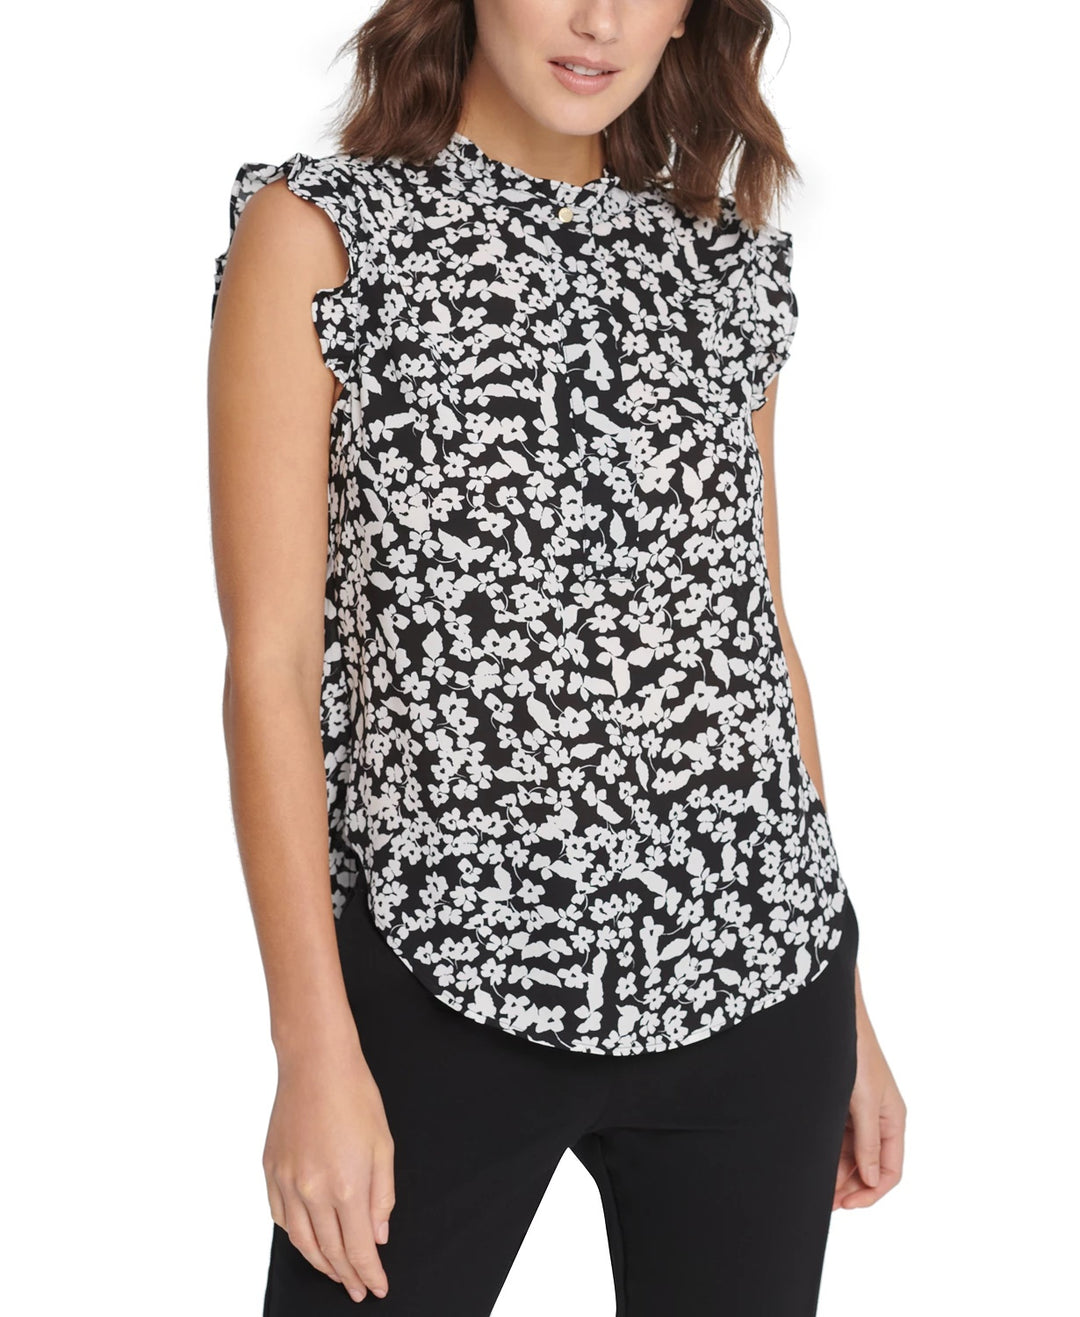 DKNY Women's Floral Print Sleeveless Ruffle Top Charcoal Size Large